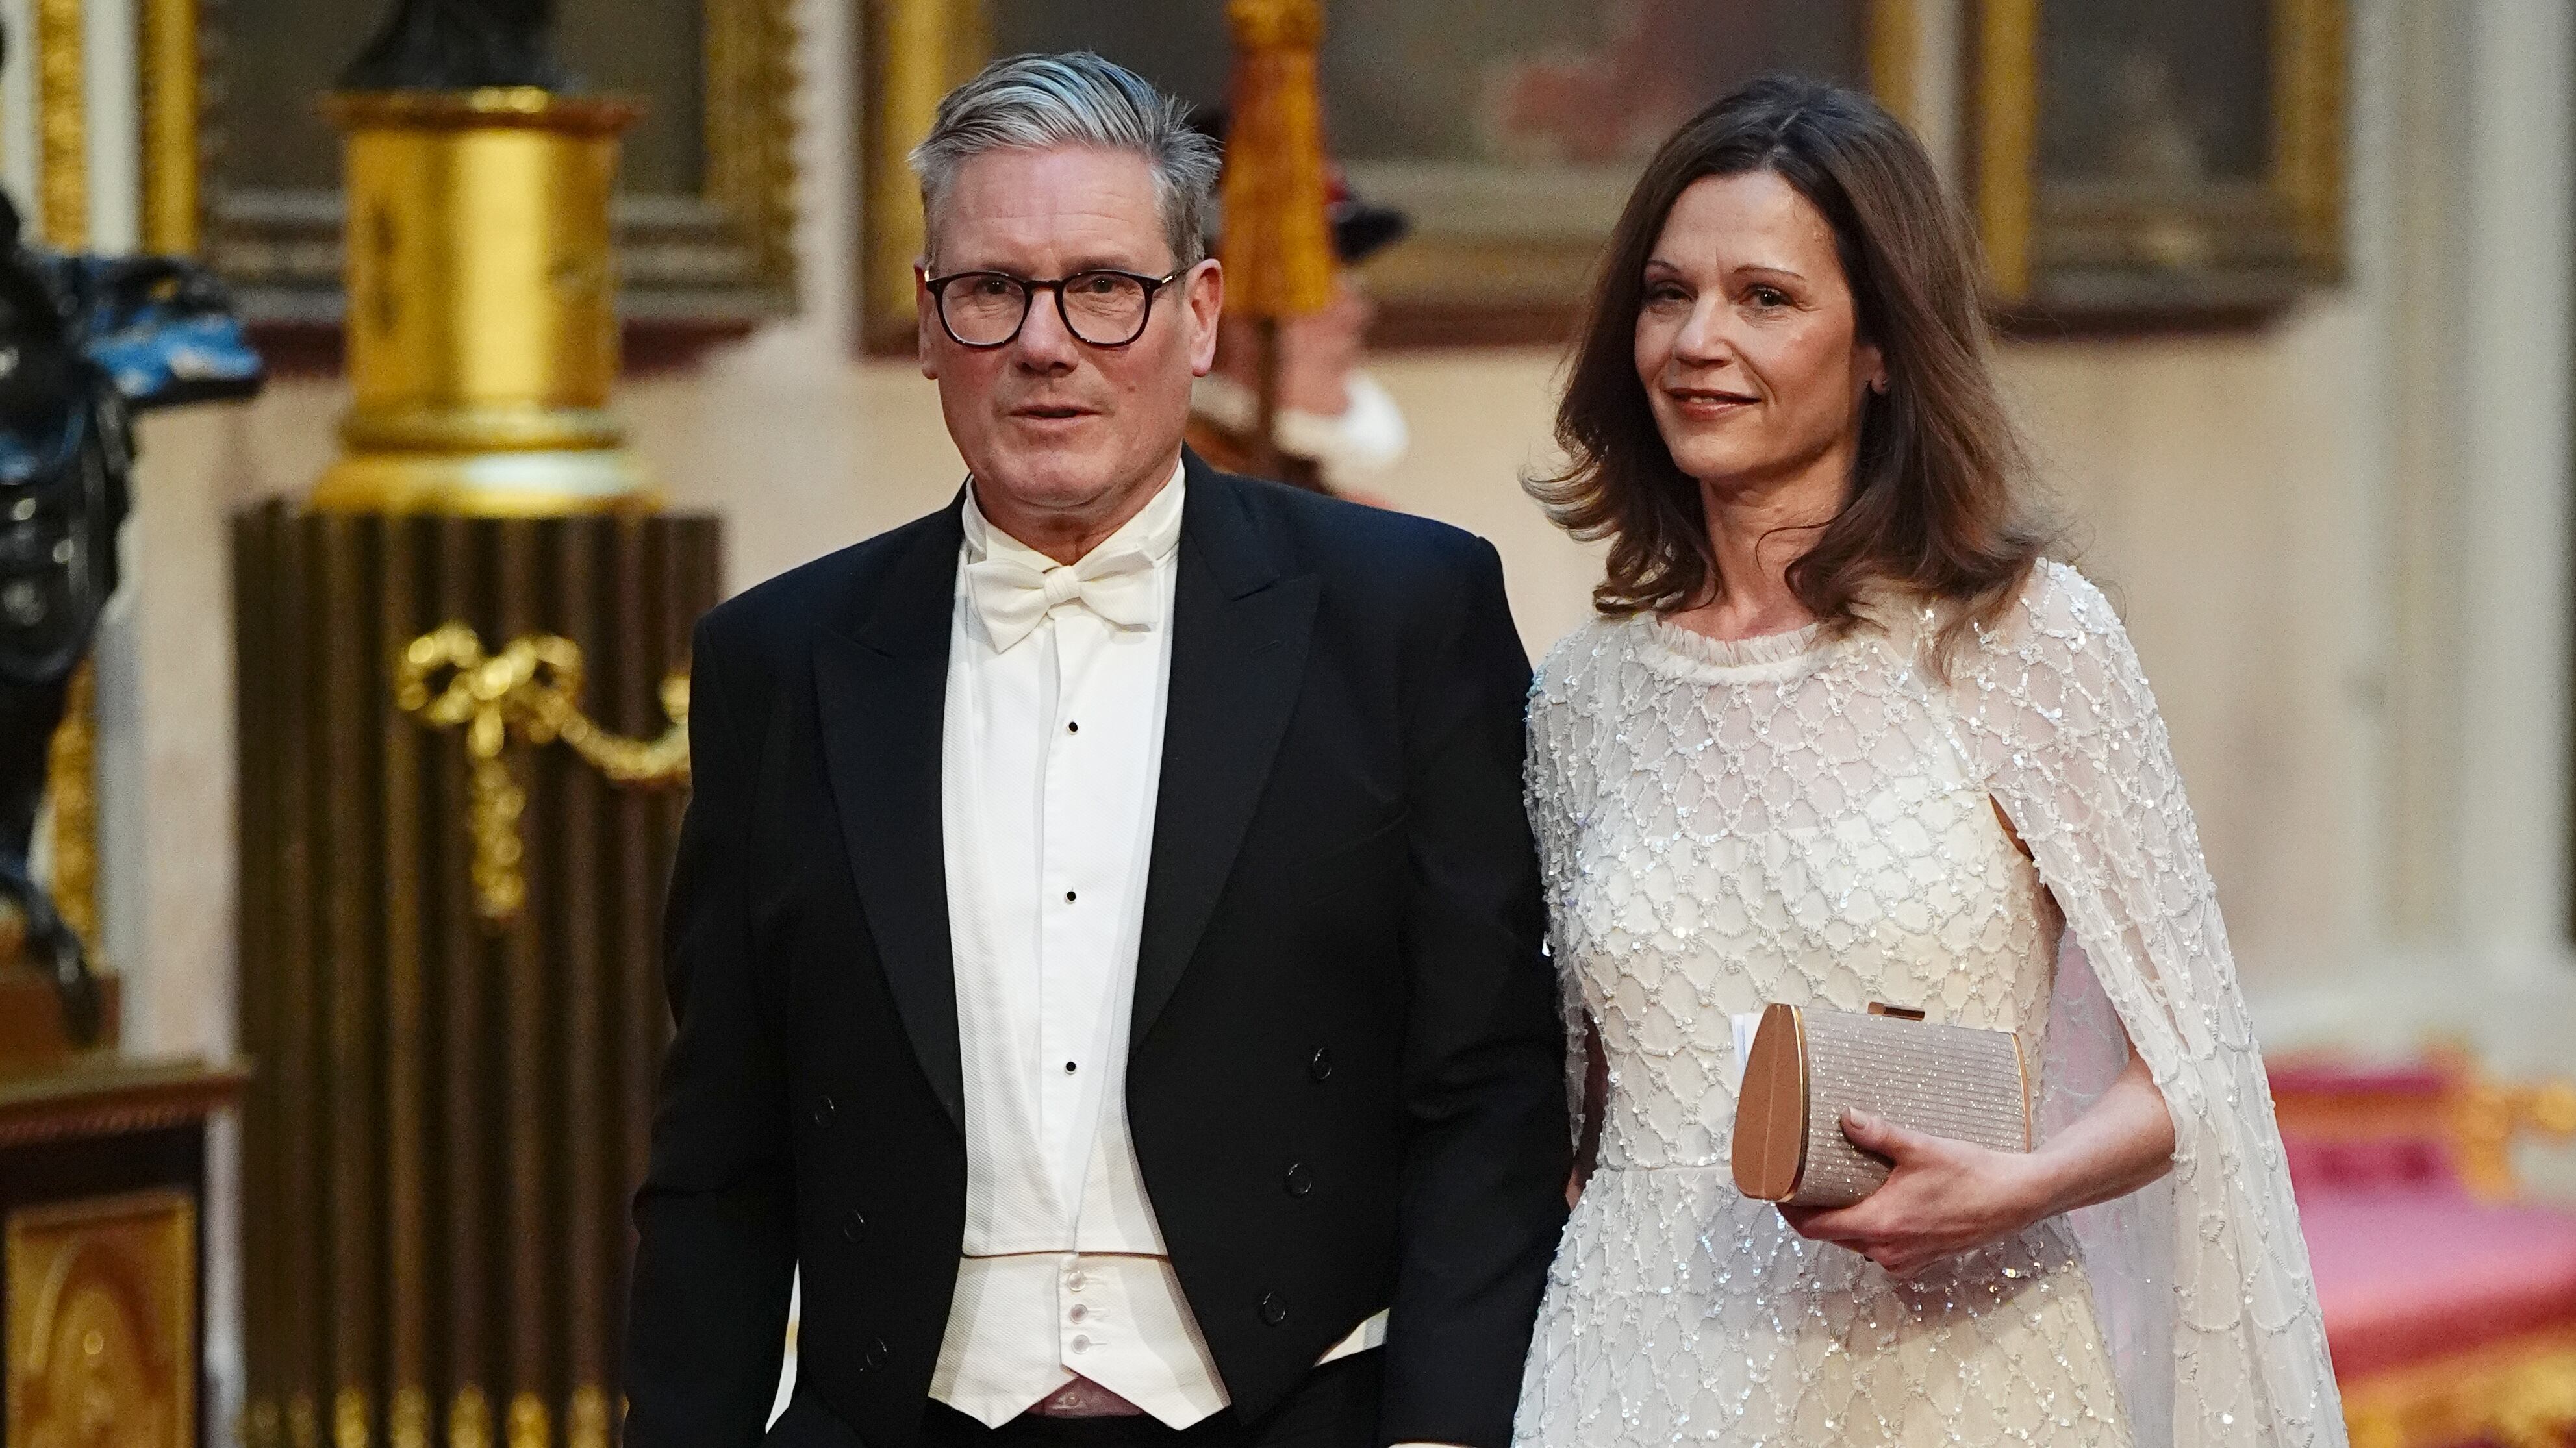 Labour leader Sir Keir Starmer and his wife Victoria make their way along the East Gallery to attend the state banquet for Emperor Naruhito and his wife Empress Masako of Japan at Buckingham Palace